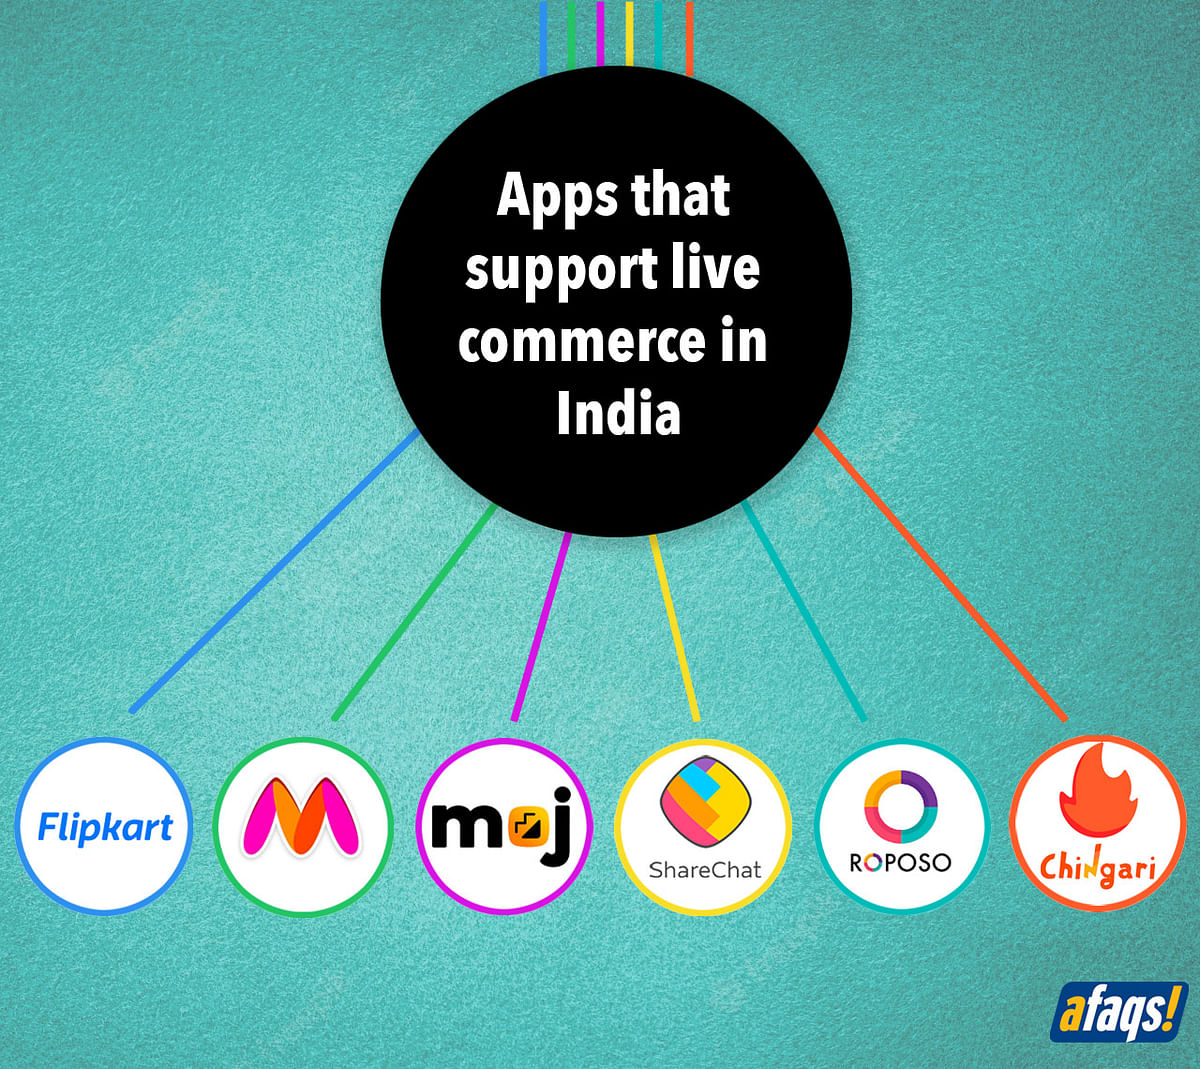 Apps that let users shop via live streaming in India